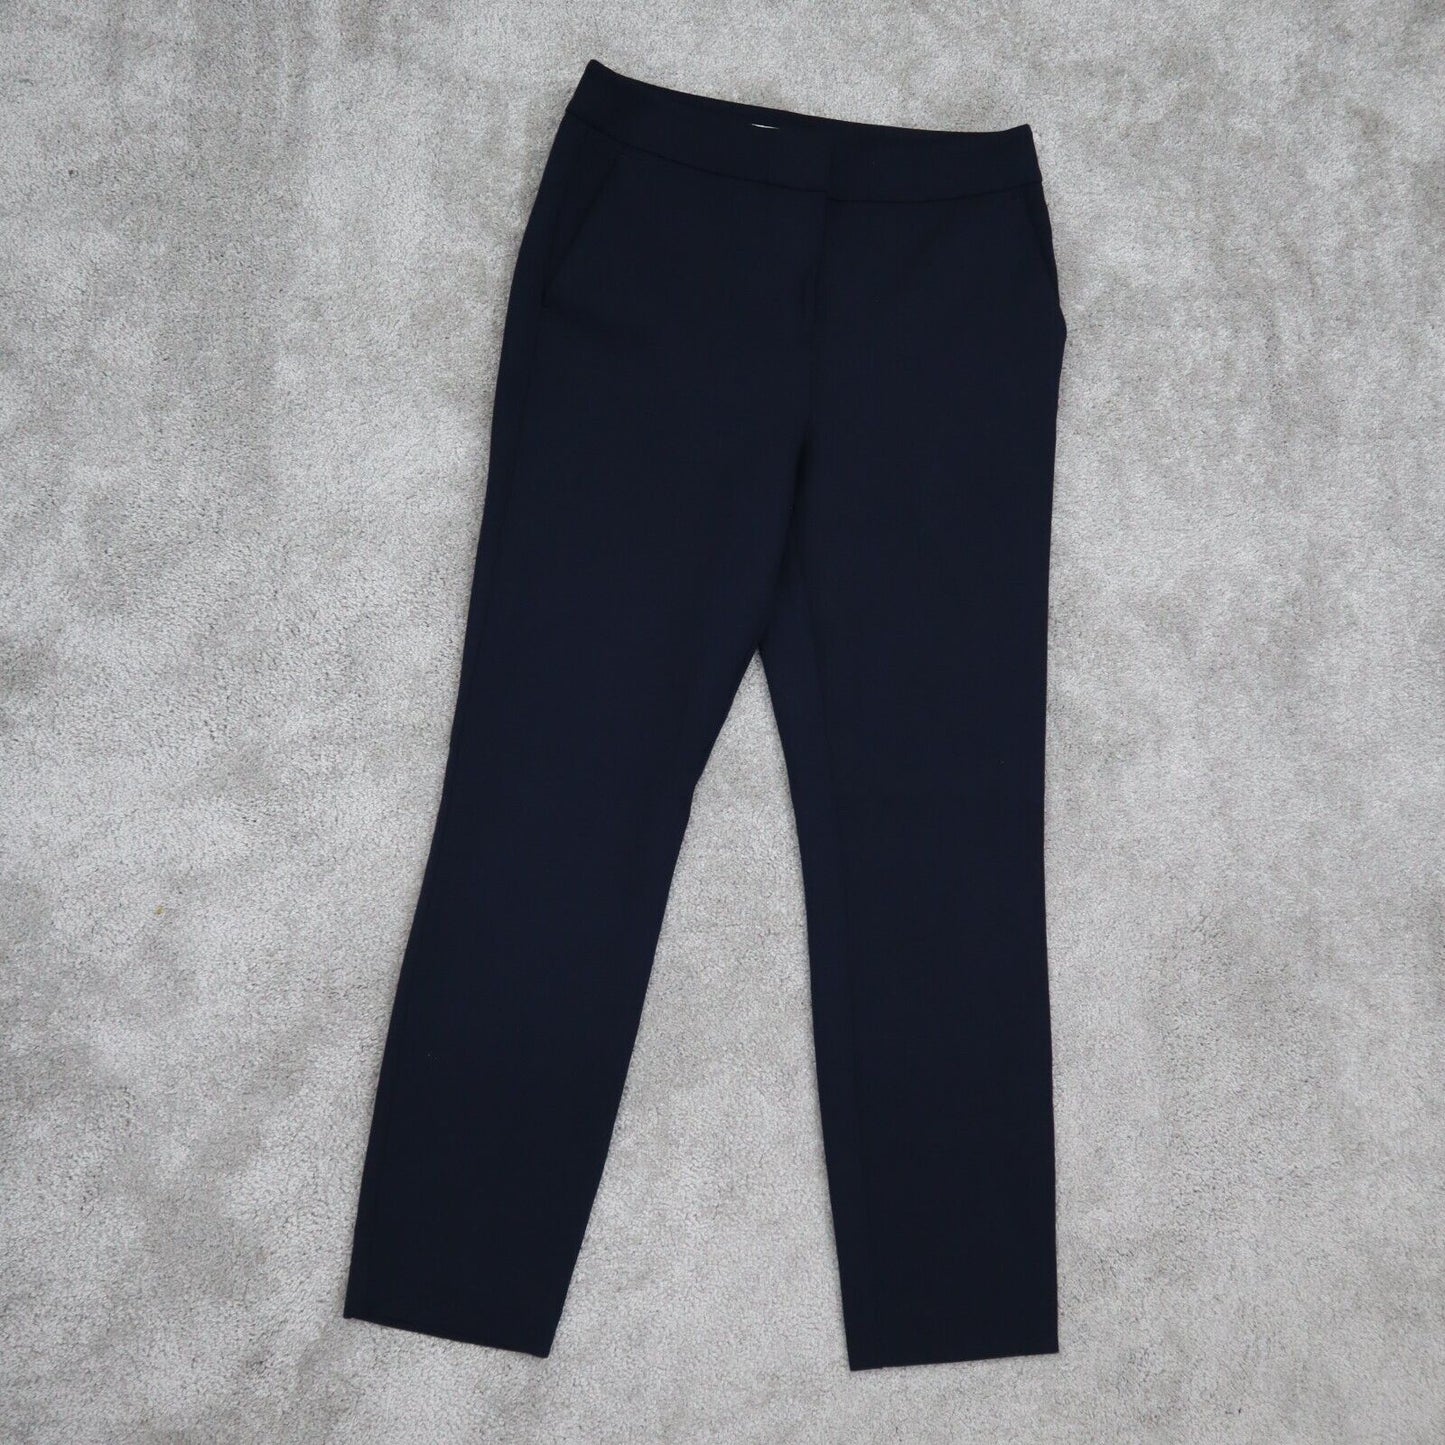 Boden Pants Womens 6R Navy Blue Solid Chino Dress Casual Mid Rise Cotton Blend